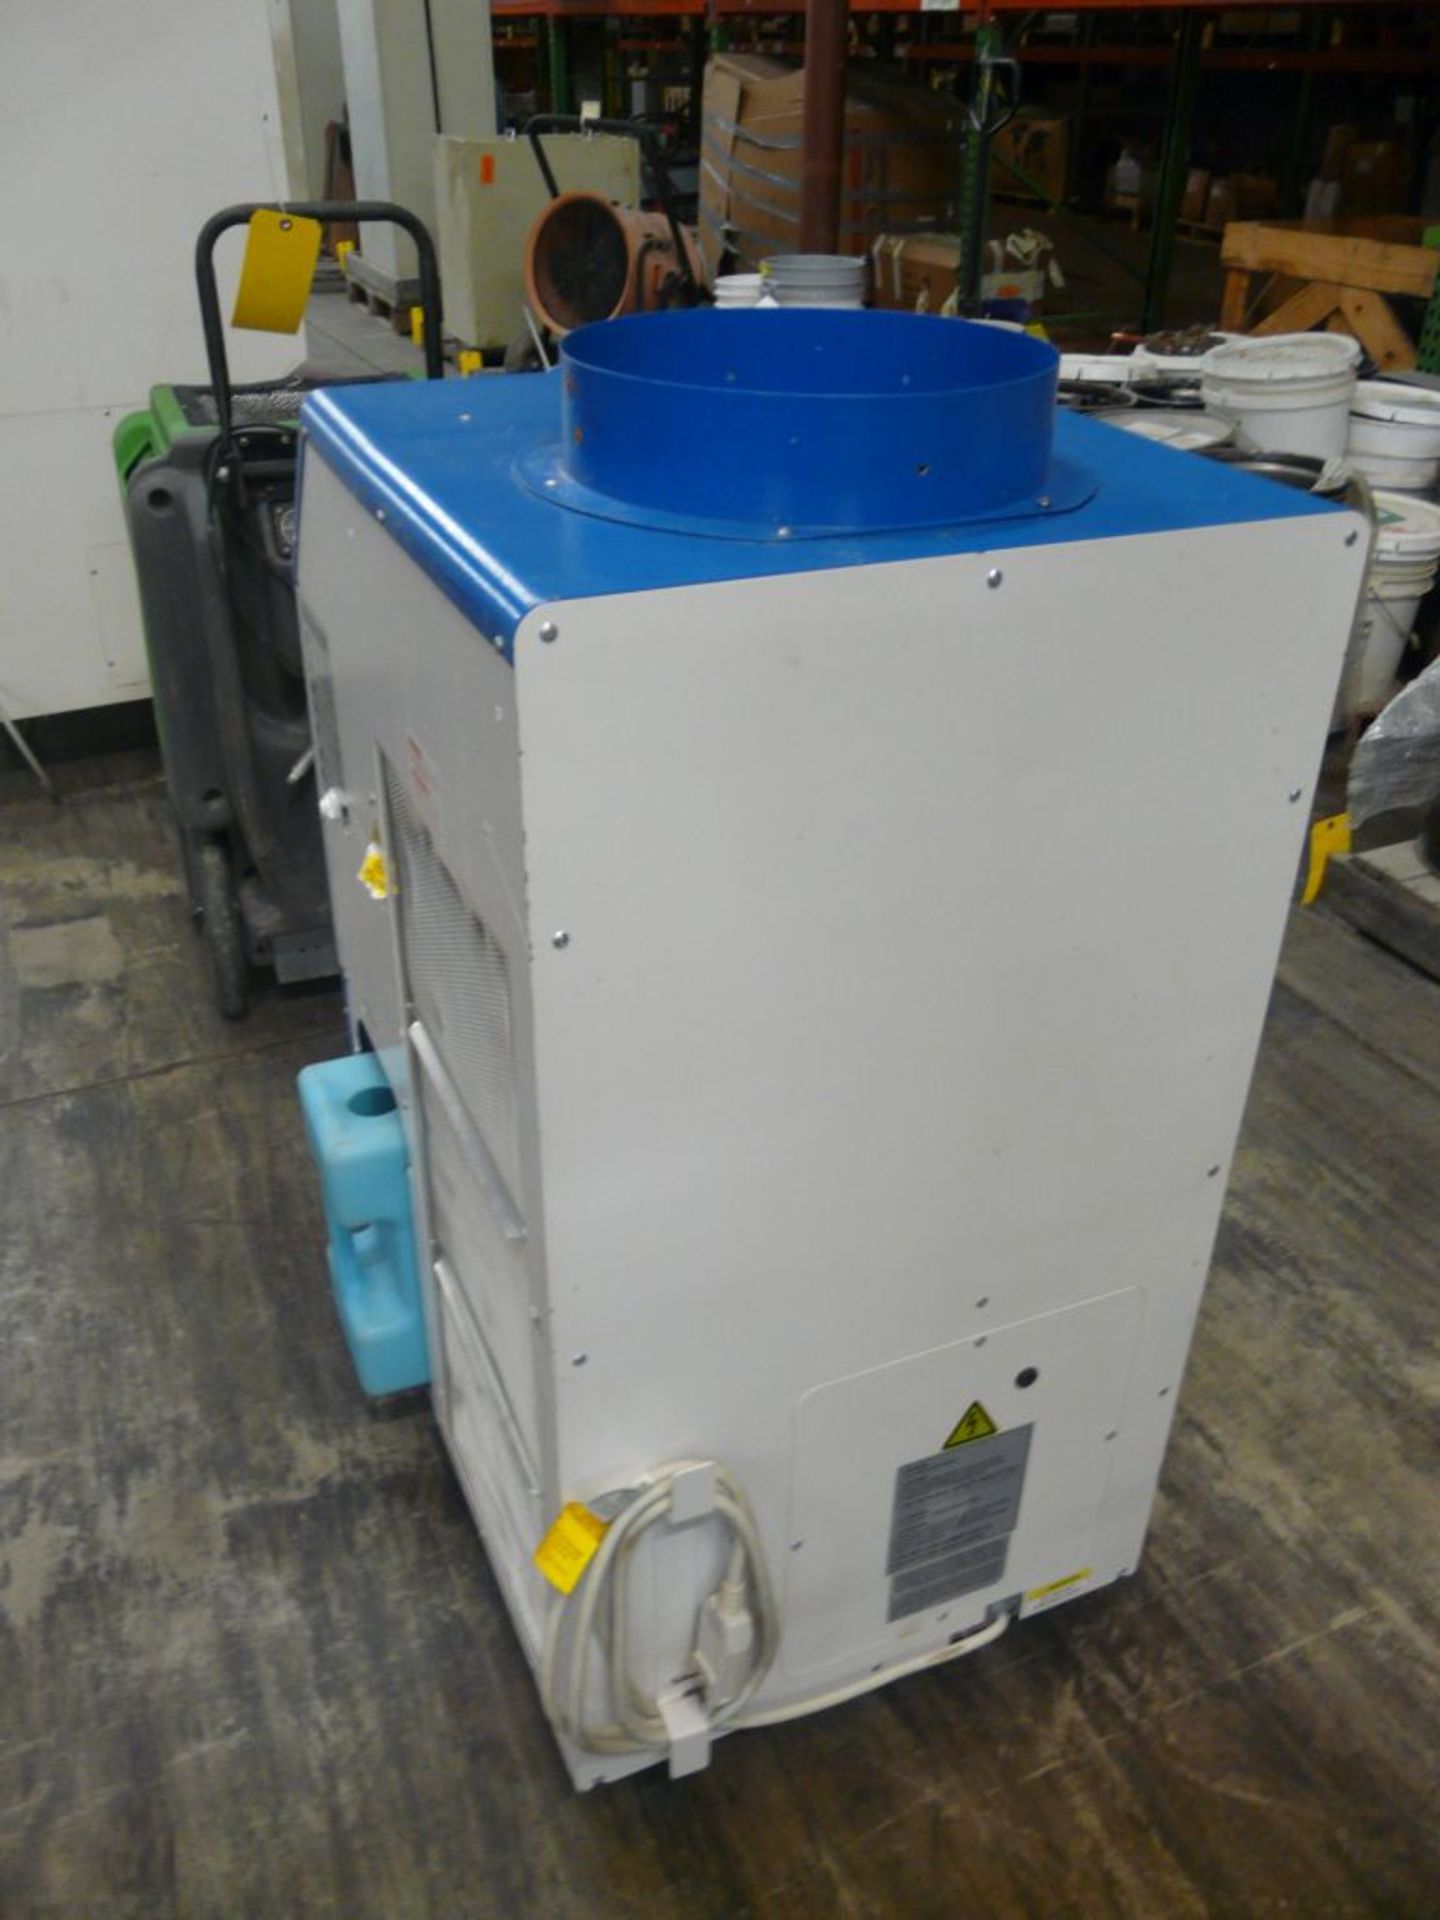 Global Portable Air Conditioner|Model No. 292660; 11.9A; 115V; 1PH; Tag: 225162 - Image 4 of 6